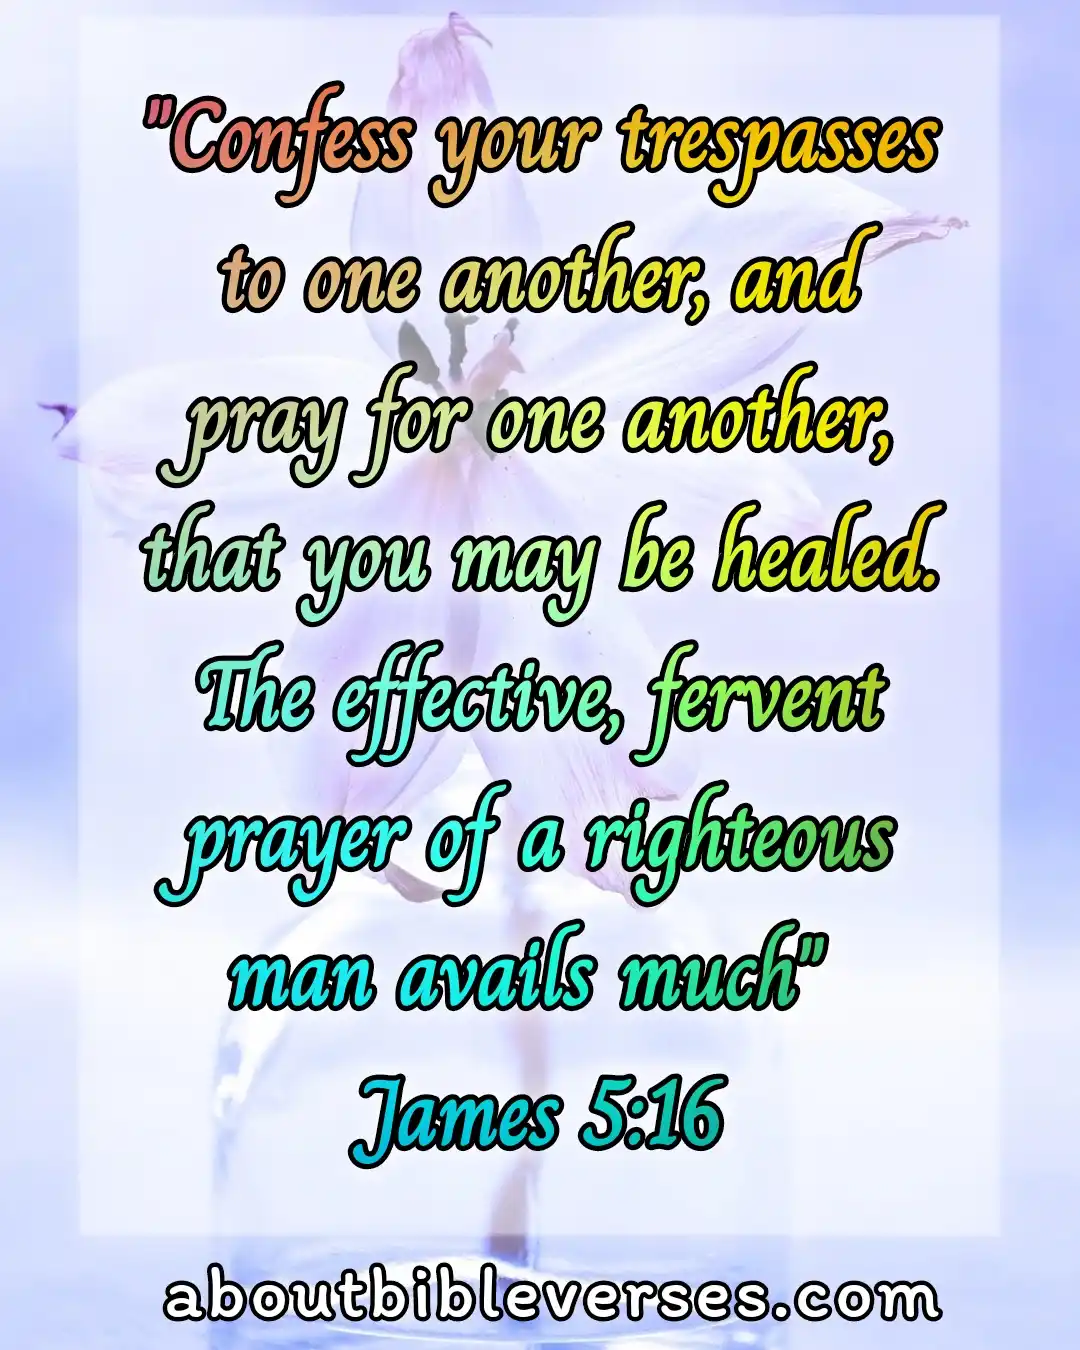 Bible Verses About God Hears Our Prayers (James 5:16)